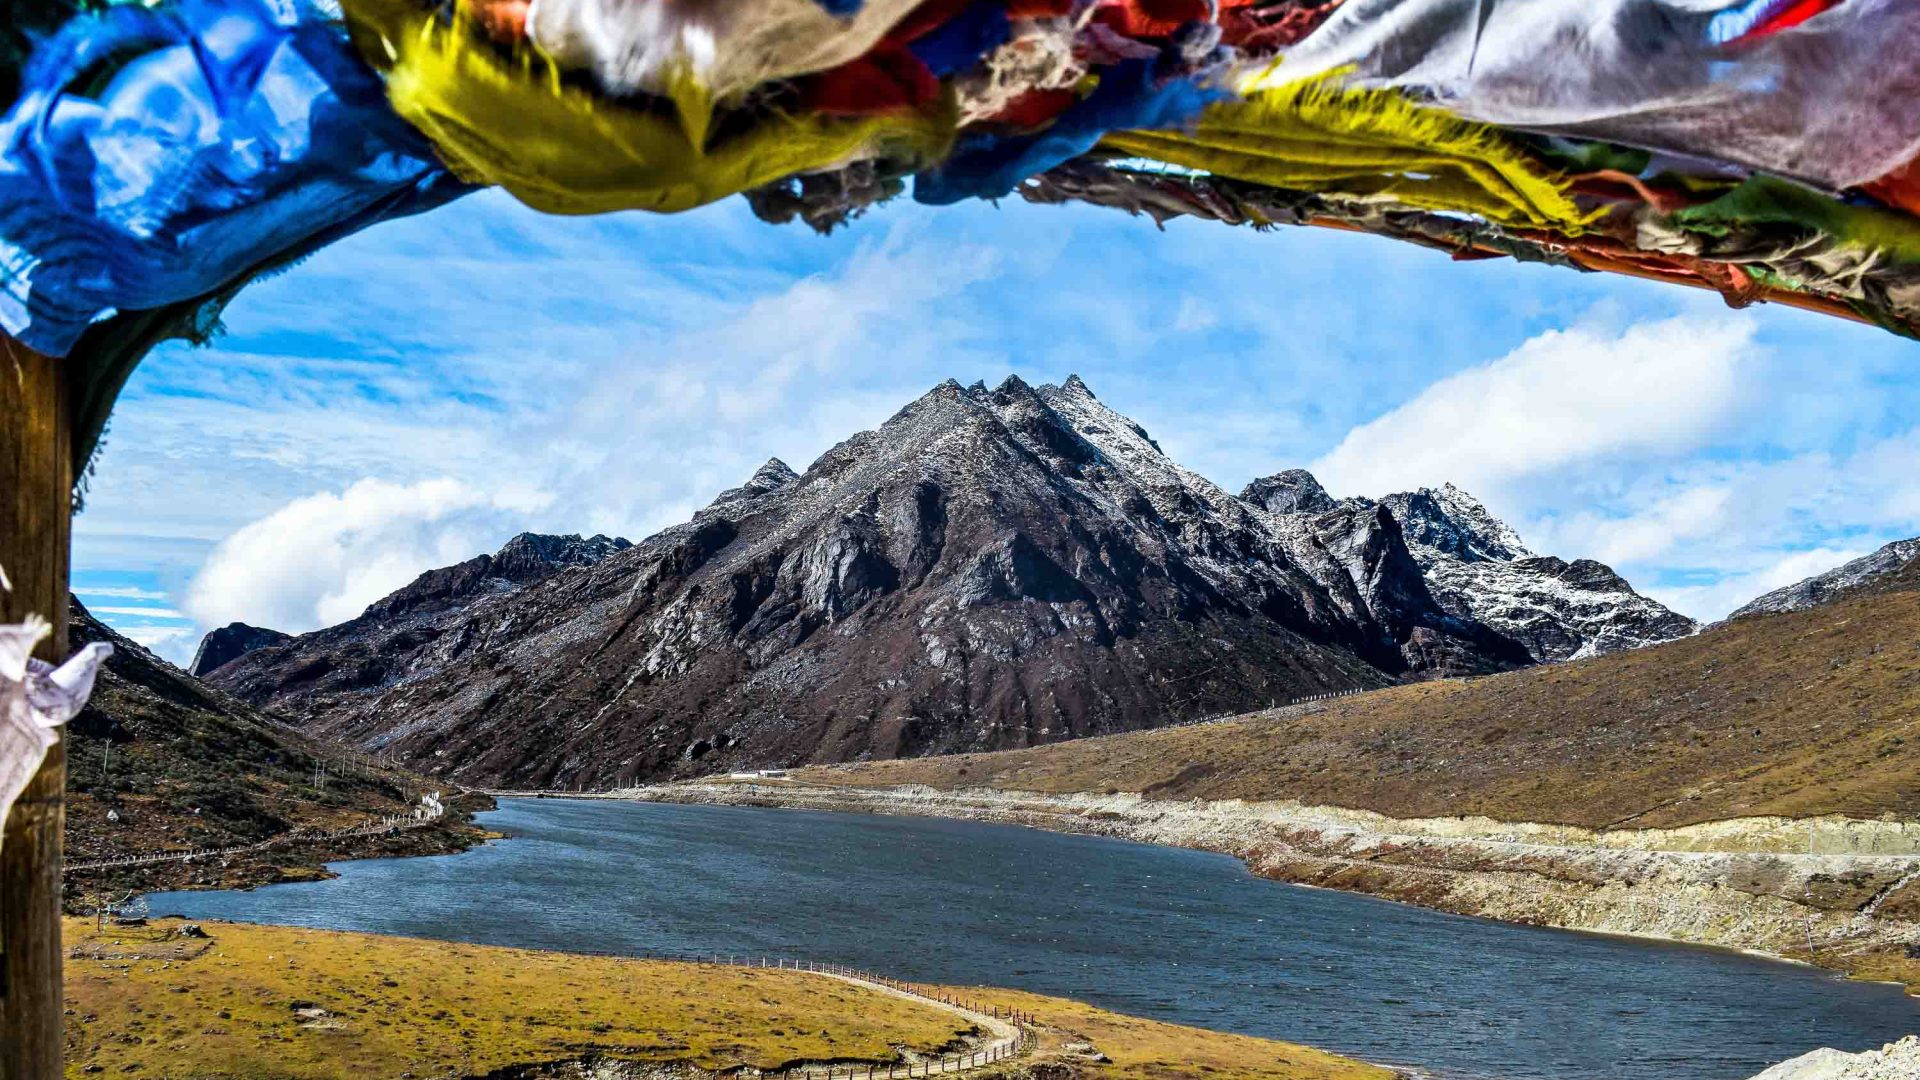 Prayer flags frame a stunning vista of blue lake and snow capped mountains.